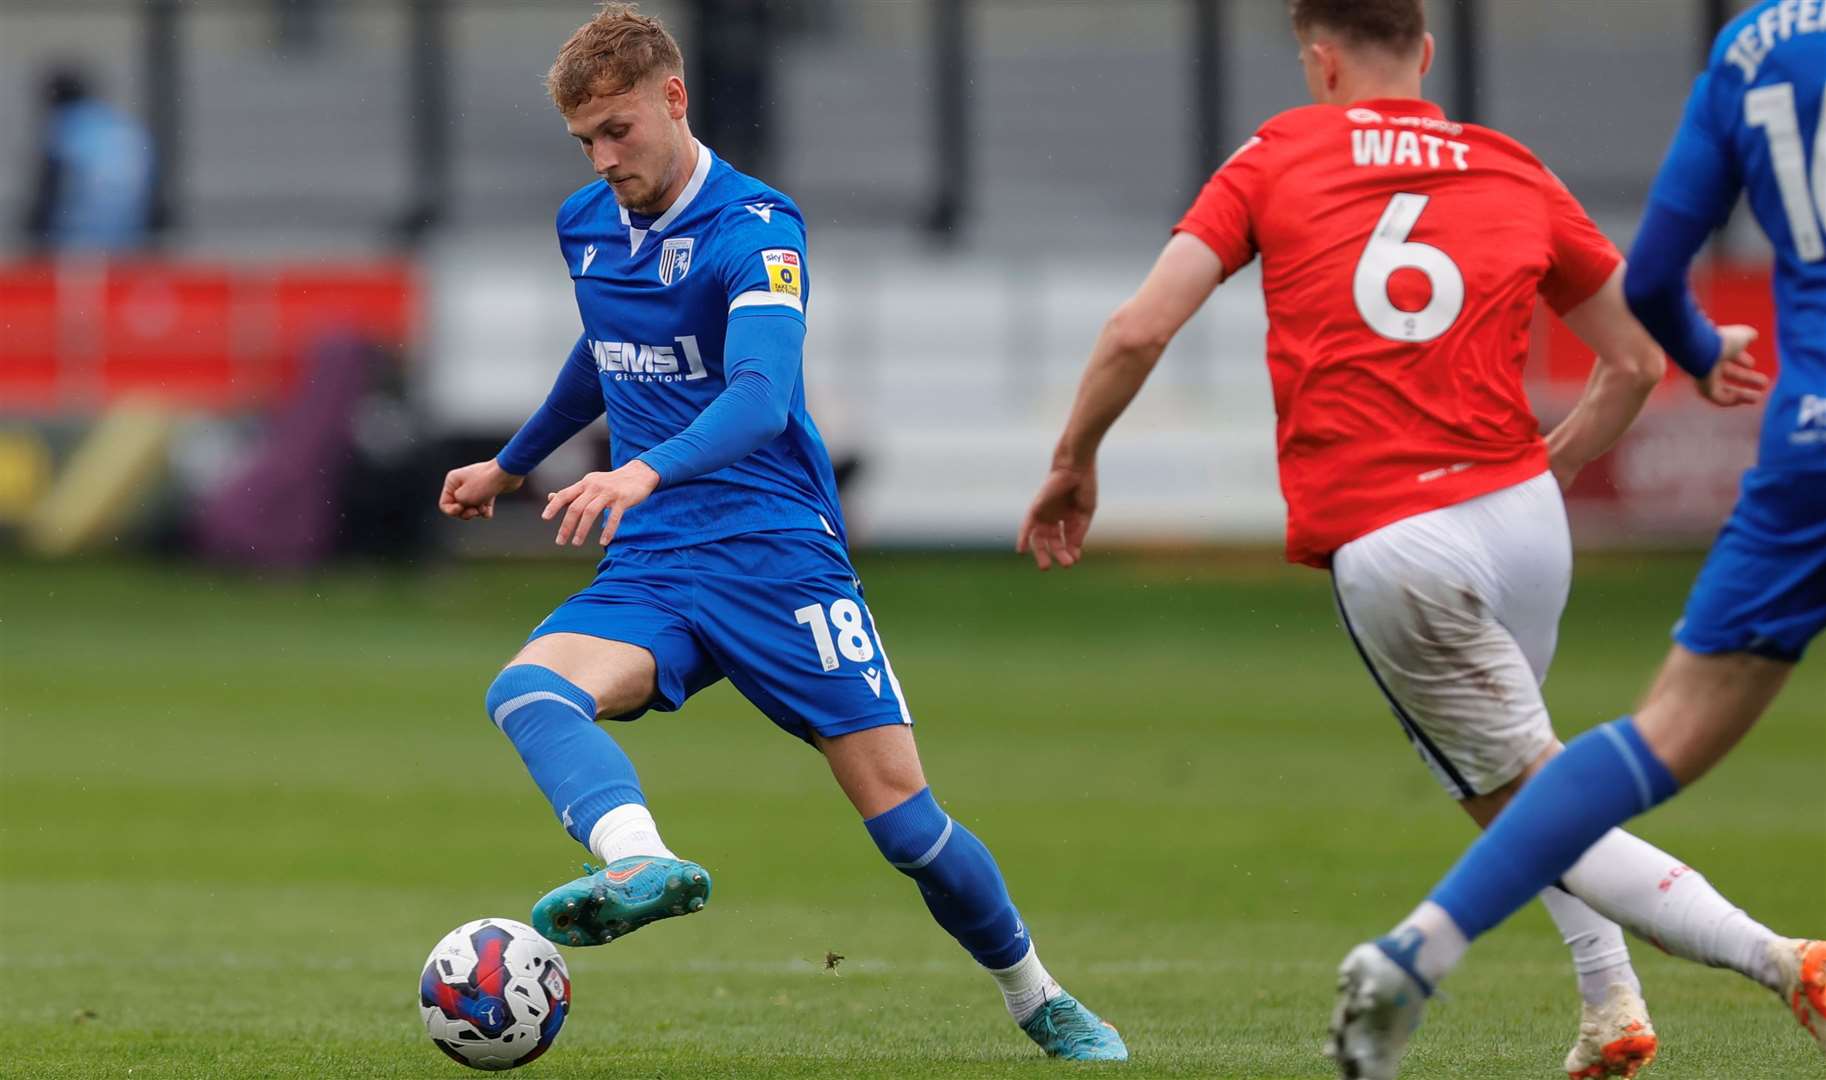 Ethan Coleman on the ball for Gillingham as they take on Salford in League 2